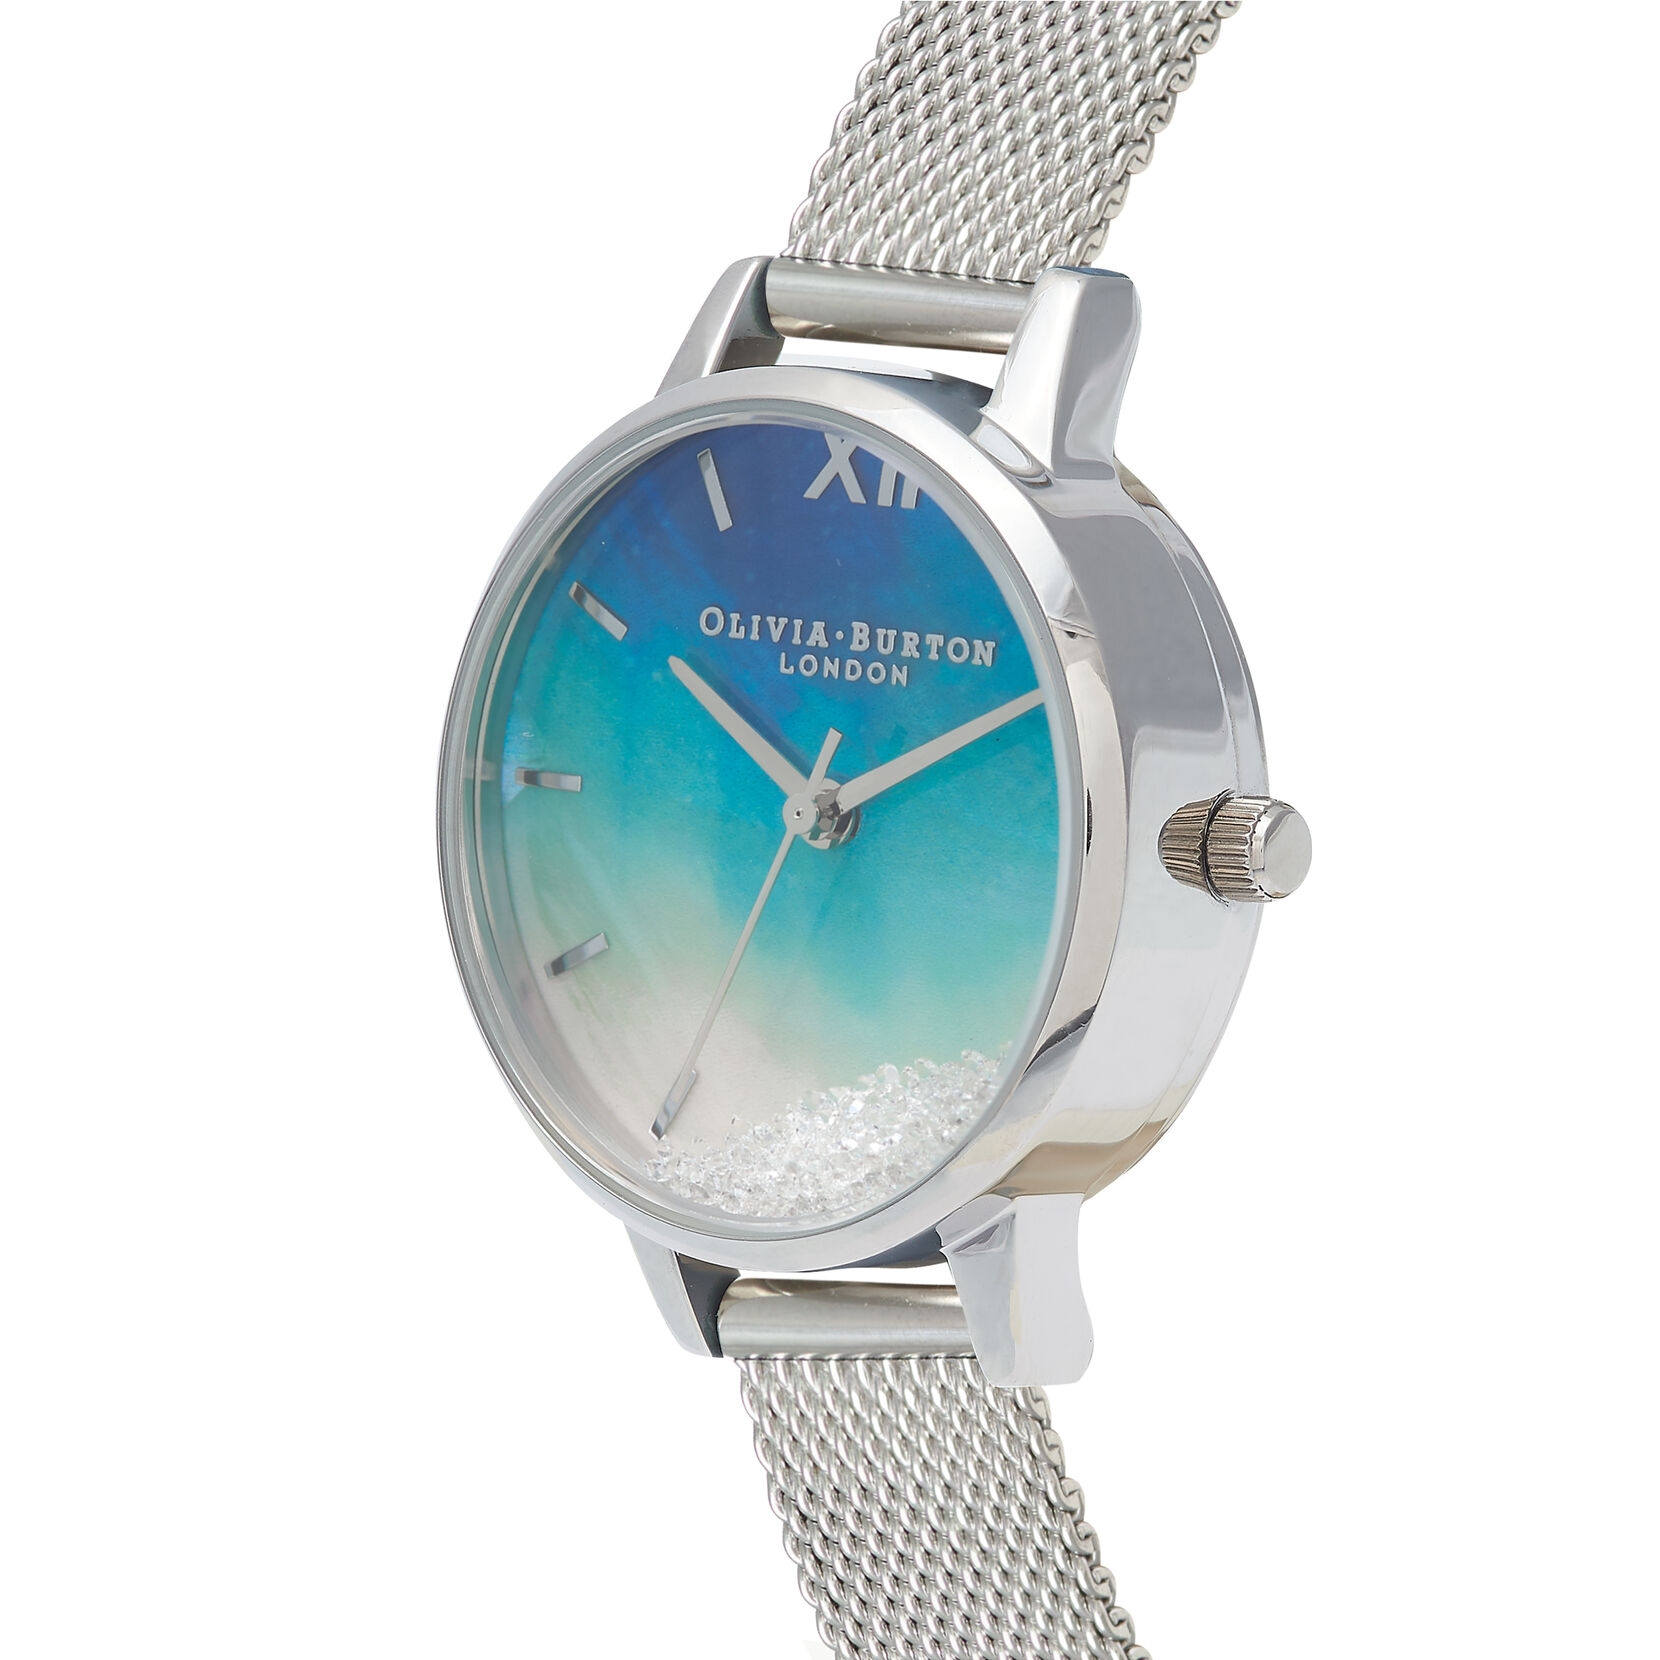 Under The Sea 30mm Blue & Silver Mesh Watch